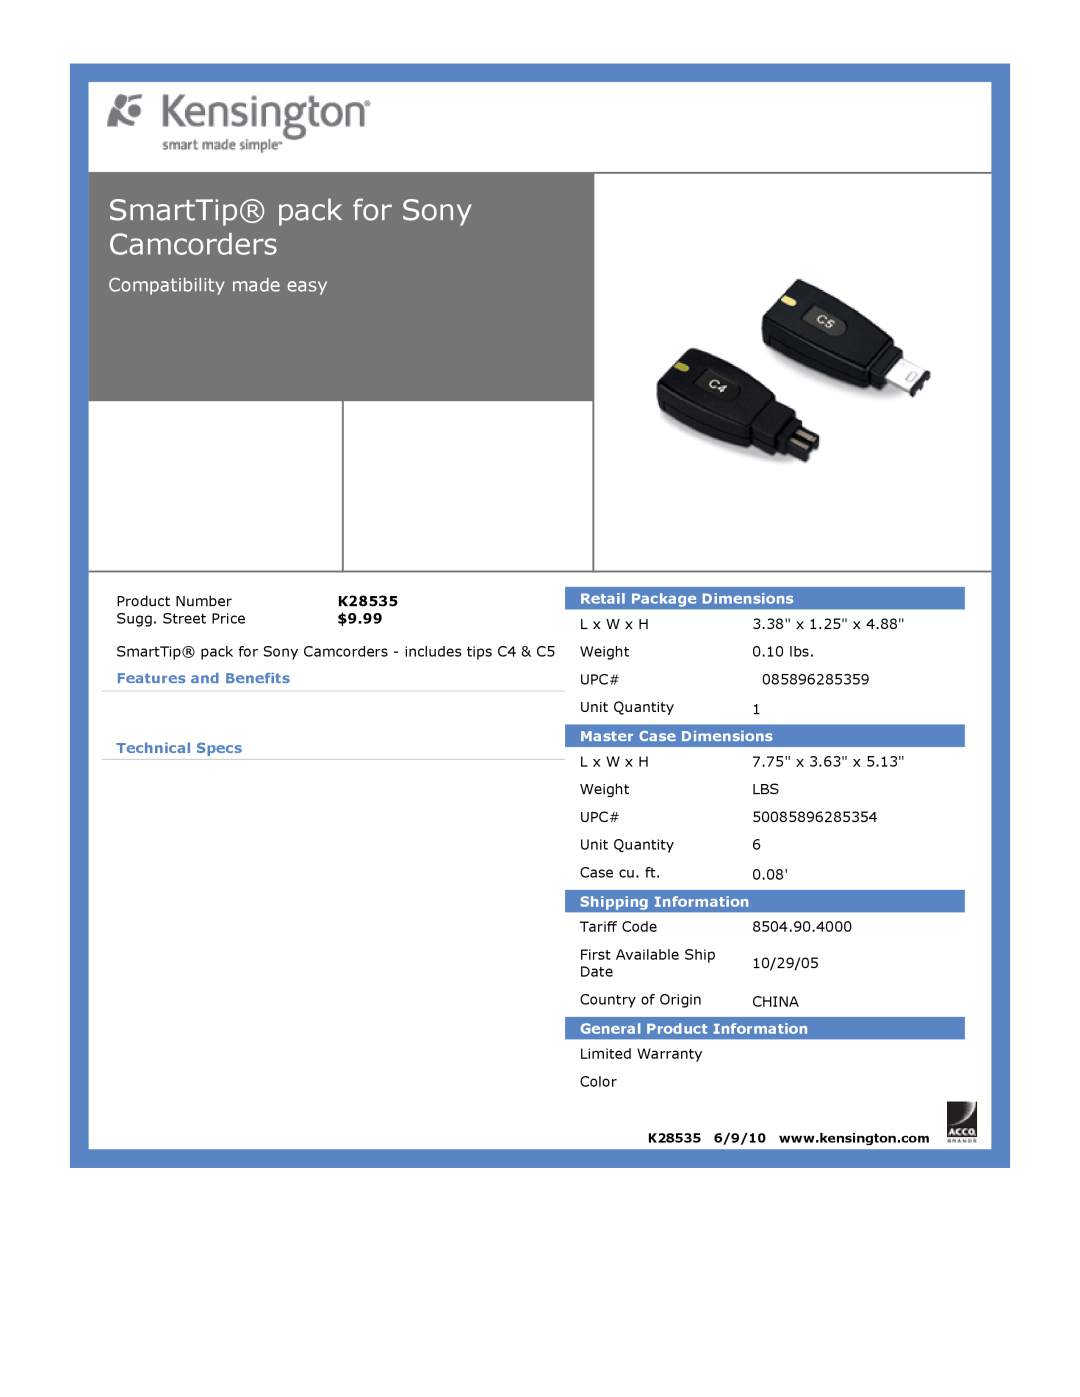 Kensington EU64325 dimensions SmartTip pack for Sony Camcorders, Compatibility made easy, $9.99, Retail Package Dimensions 